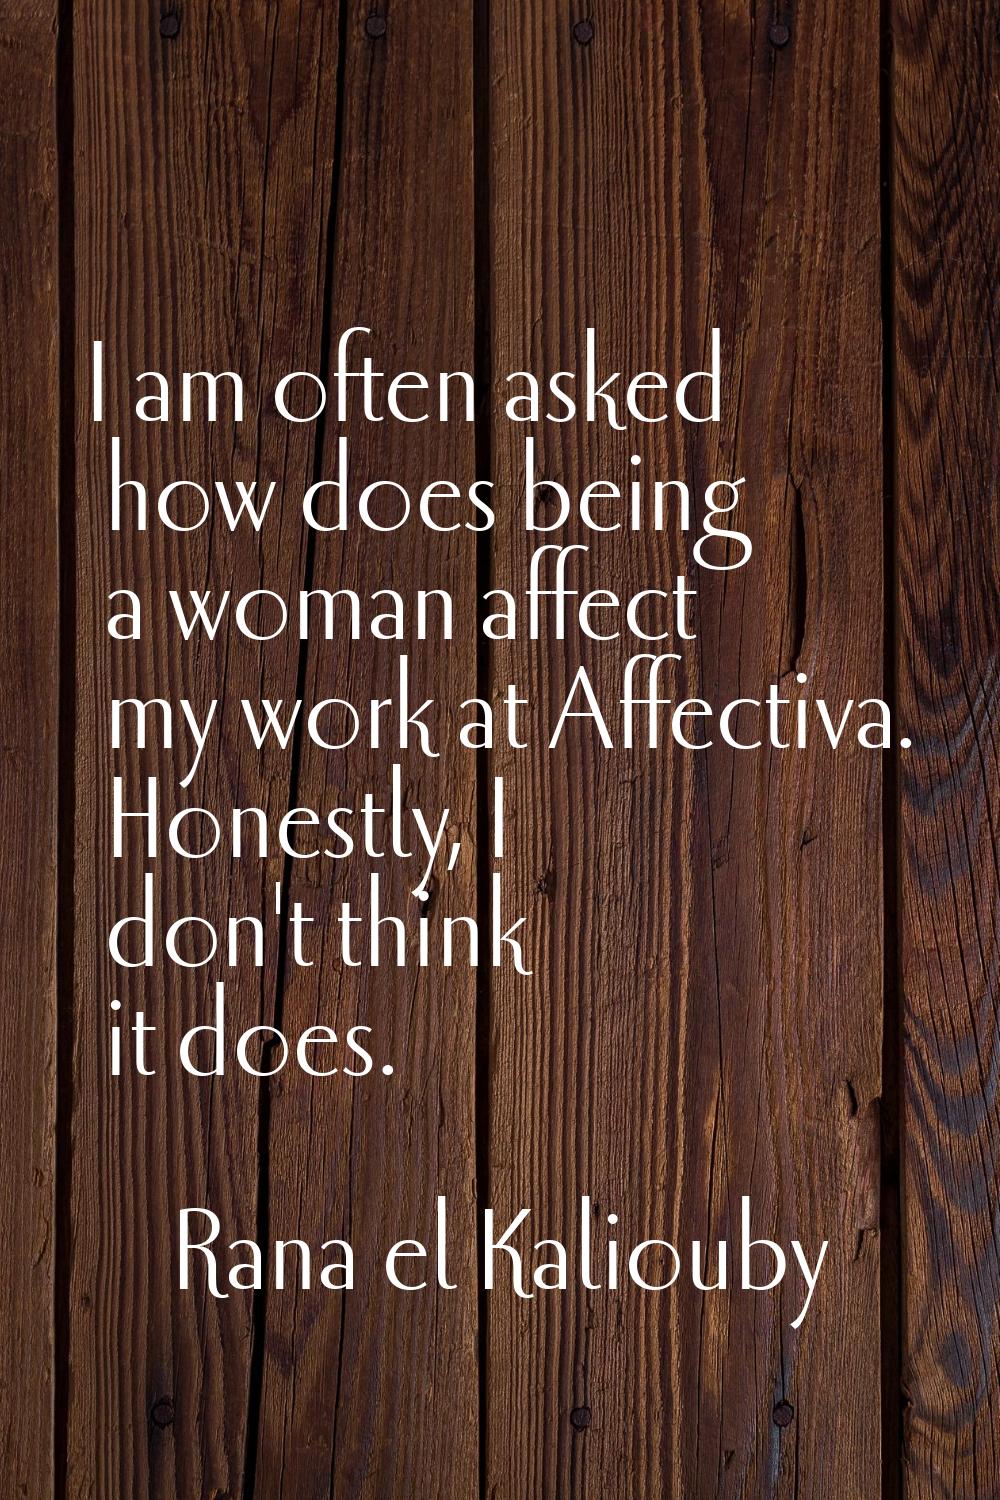 I am often asked how does being a woman affect my work at Affectiva. Honestly, I don't think it doe